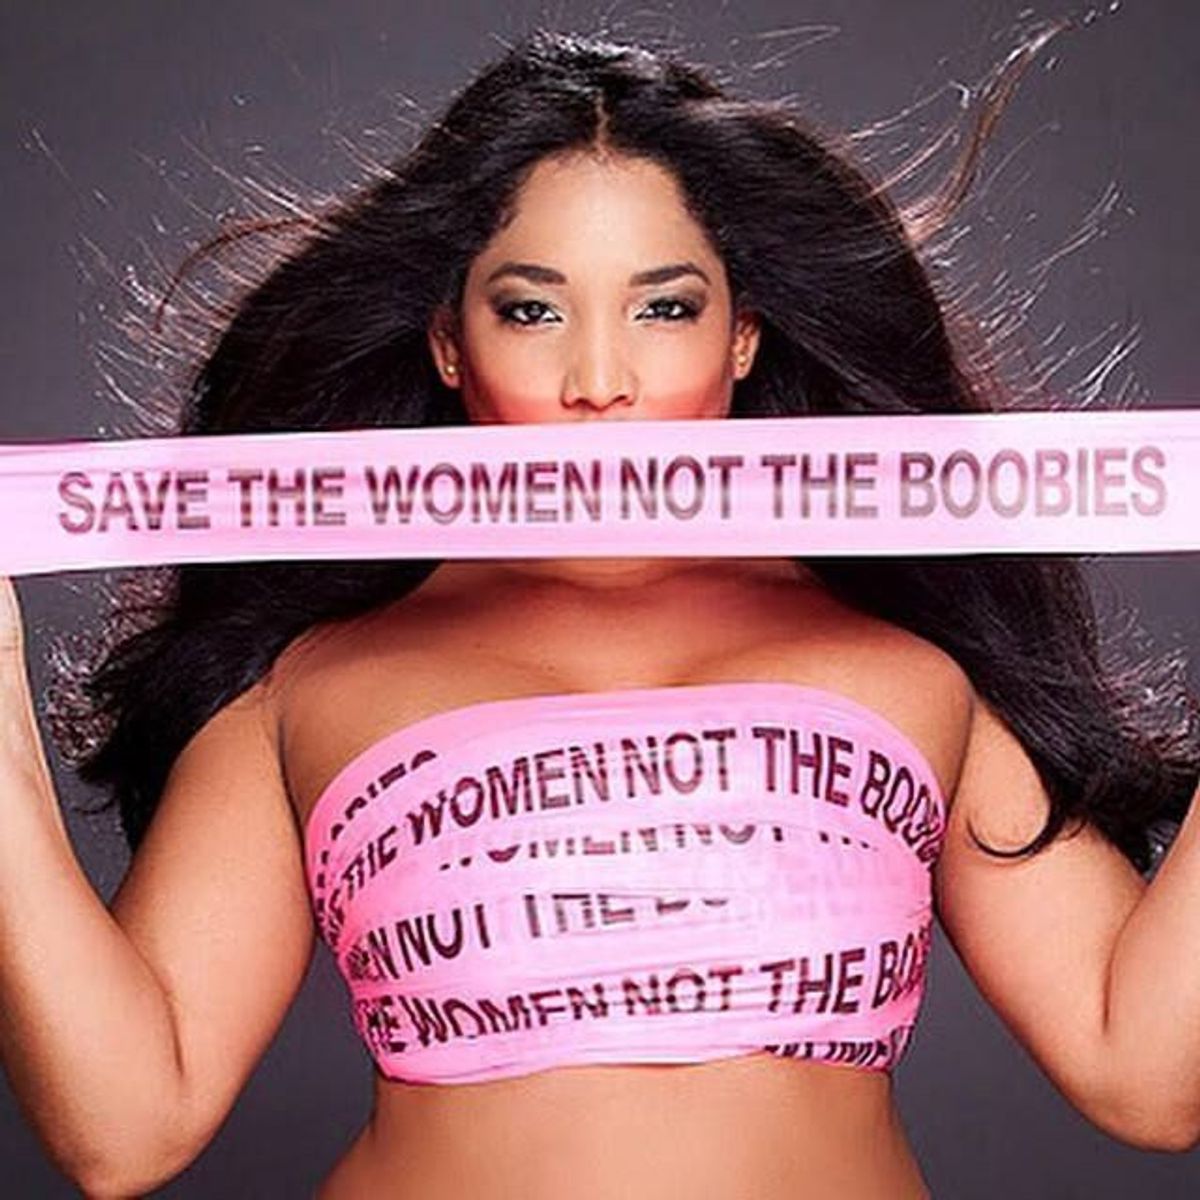 Why I Find "Save The Boobs" Offensive